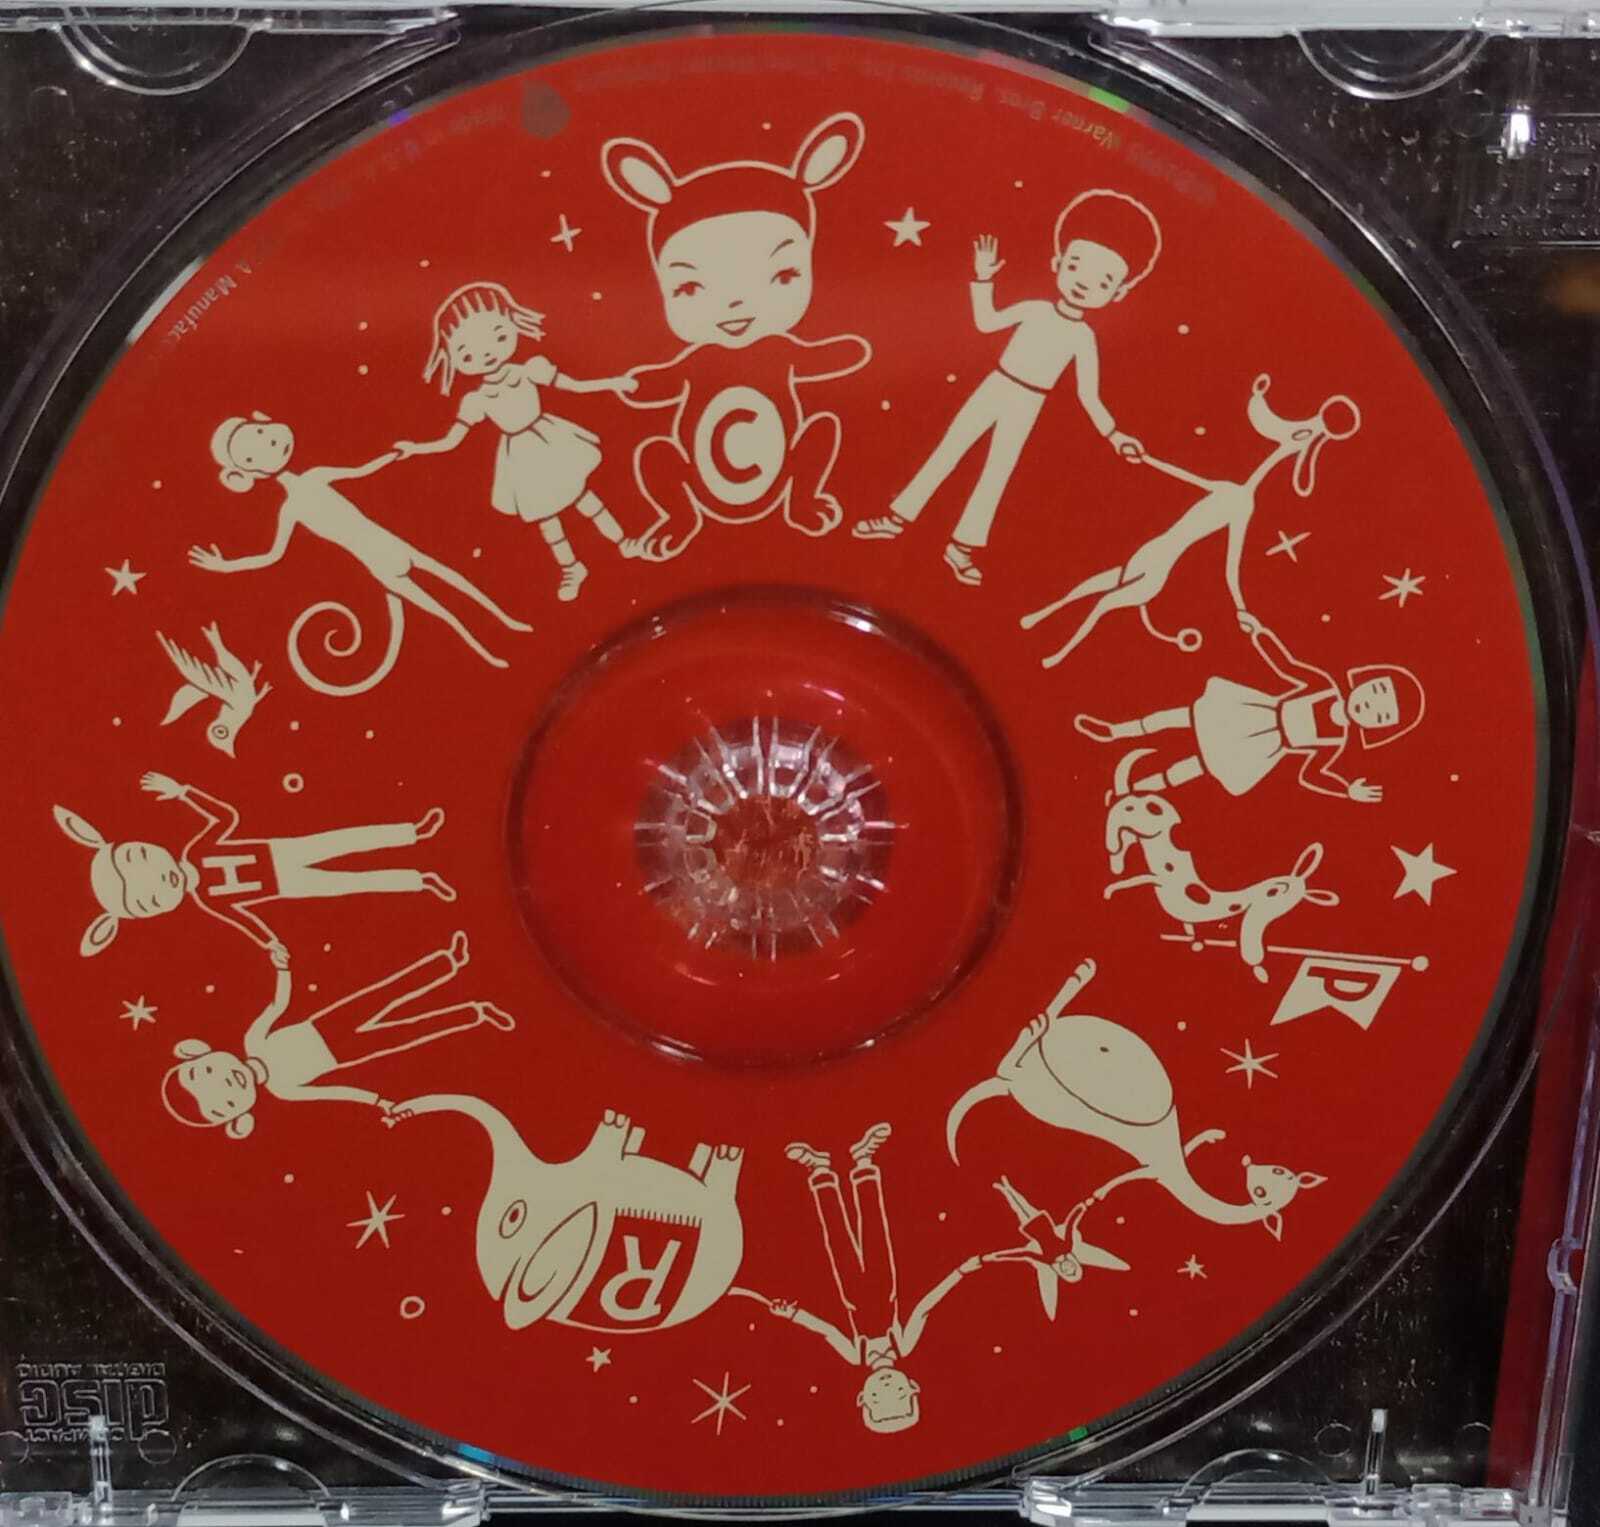 CD - Red Hot Chili Peppers - One Hot Minute (USA)